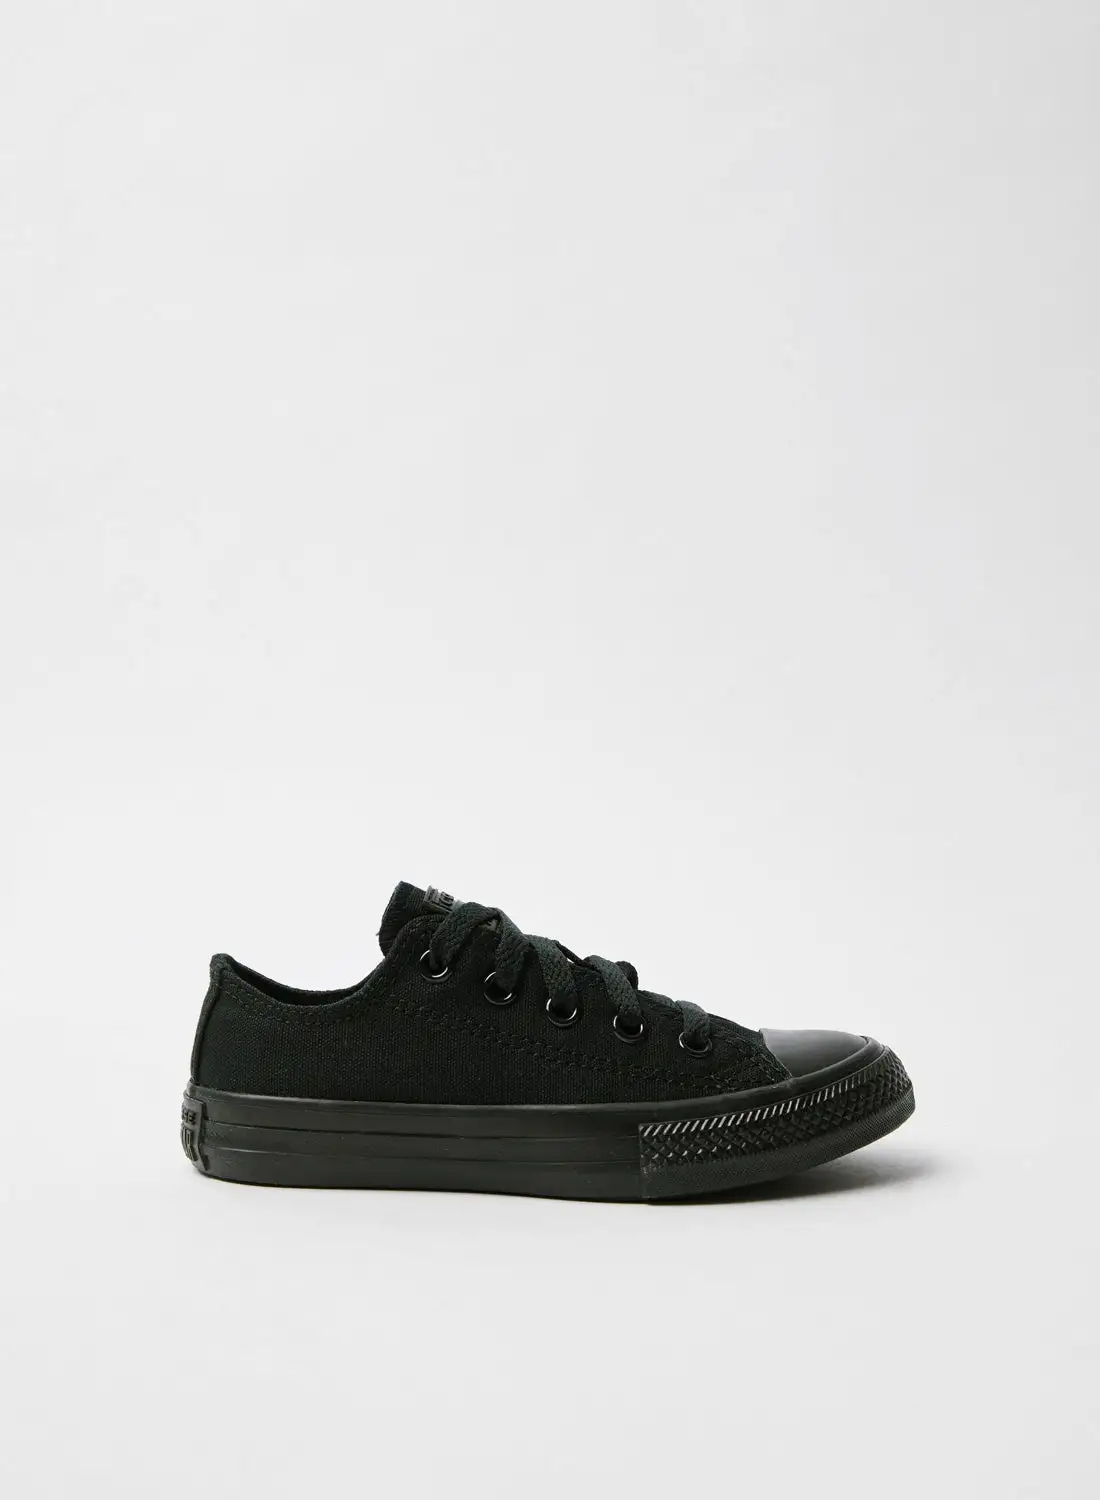 CONVERSE Chuck Taylor All Star Sneakers Black